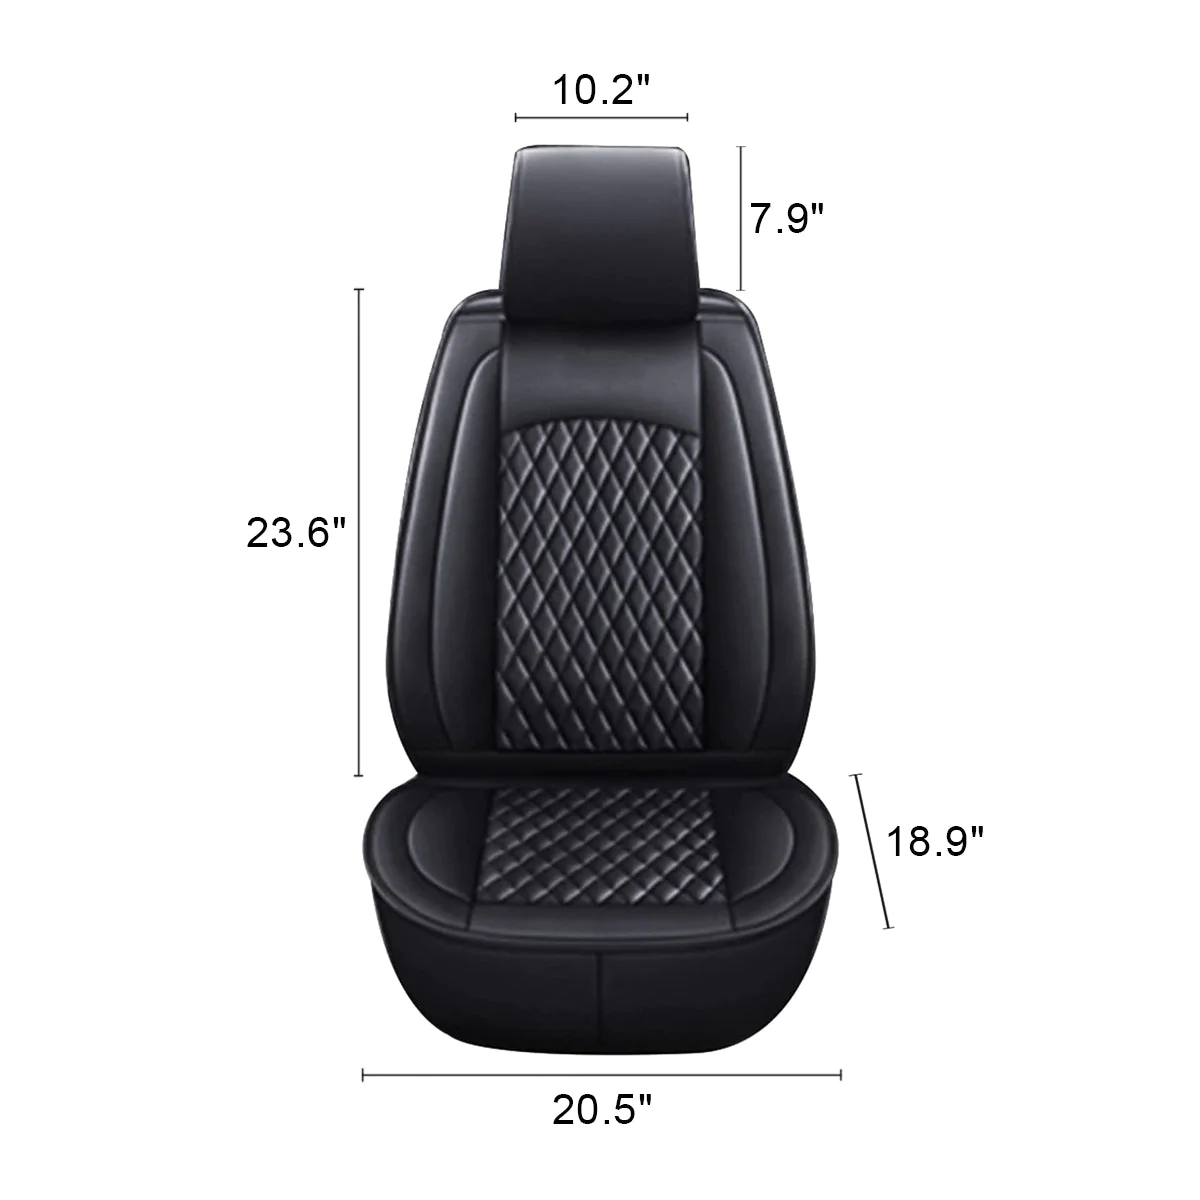 Custom Text For Seat Covers 5 Seats Full Set, Custom Fit For Your Cars, Leatherette Automotive Seat Cushion Protector Universal Fit, Vehicle Auto Interior Decor DA13988